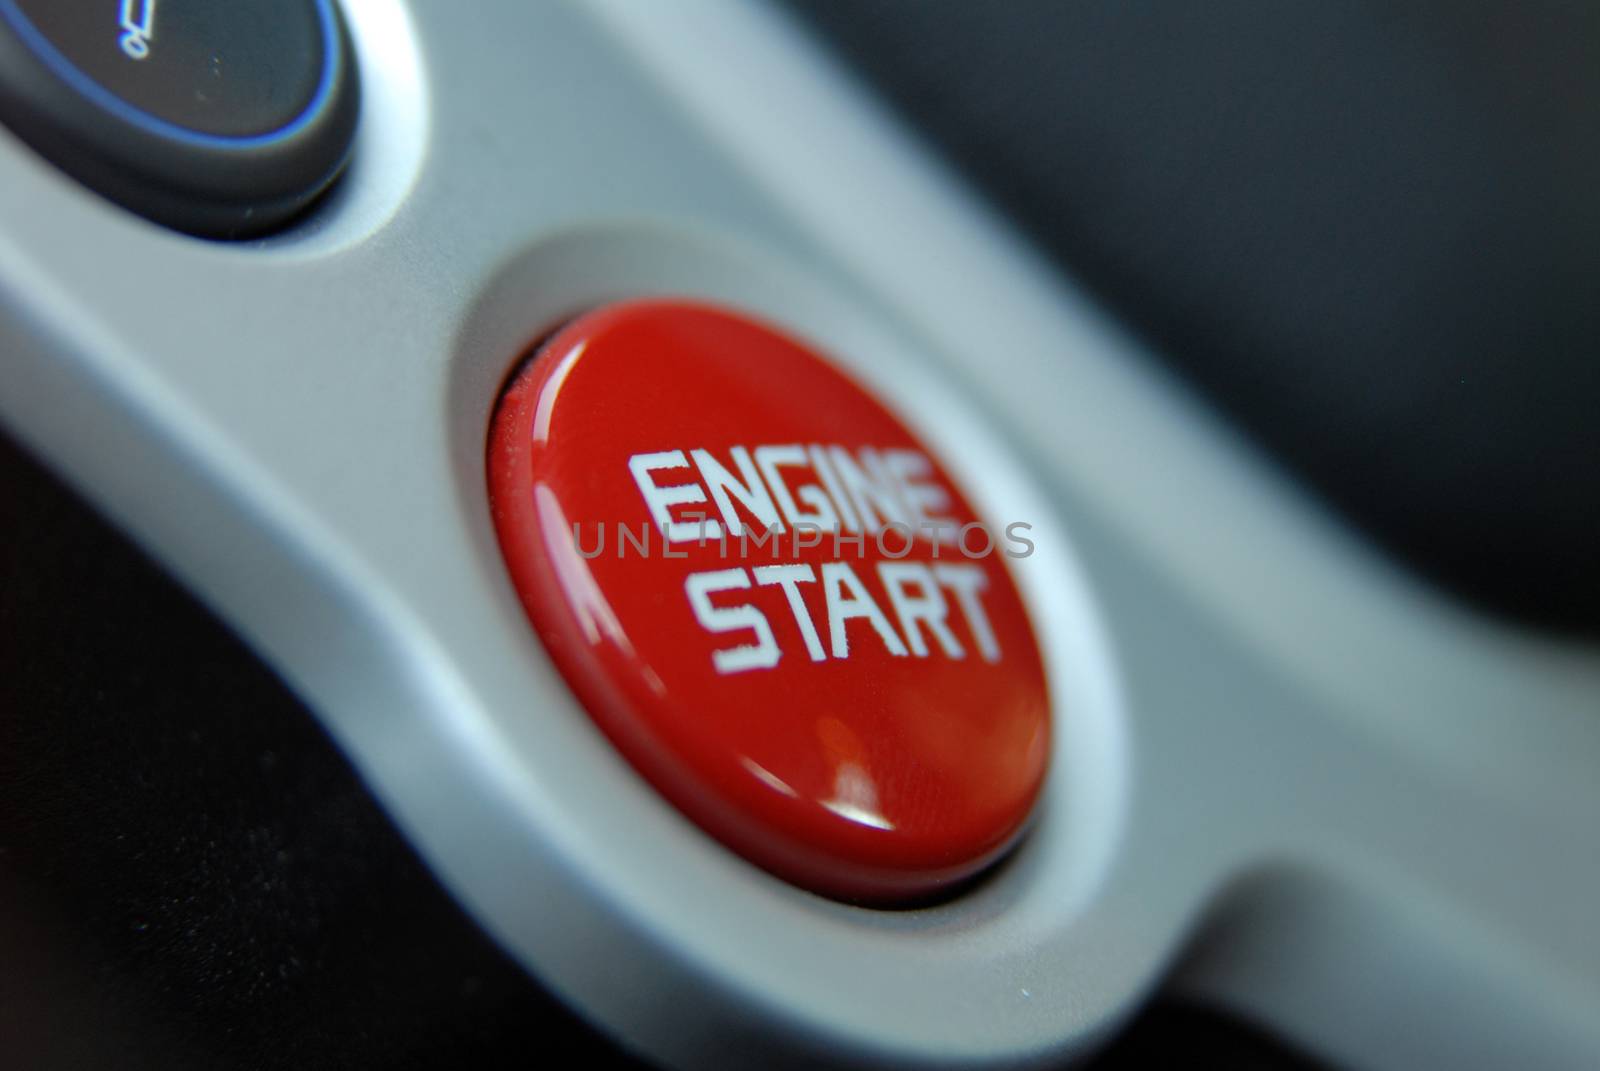 Start stop engine button on a modern sports car steering wheel by aselsa